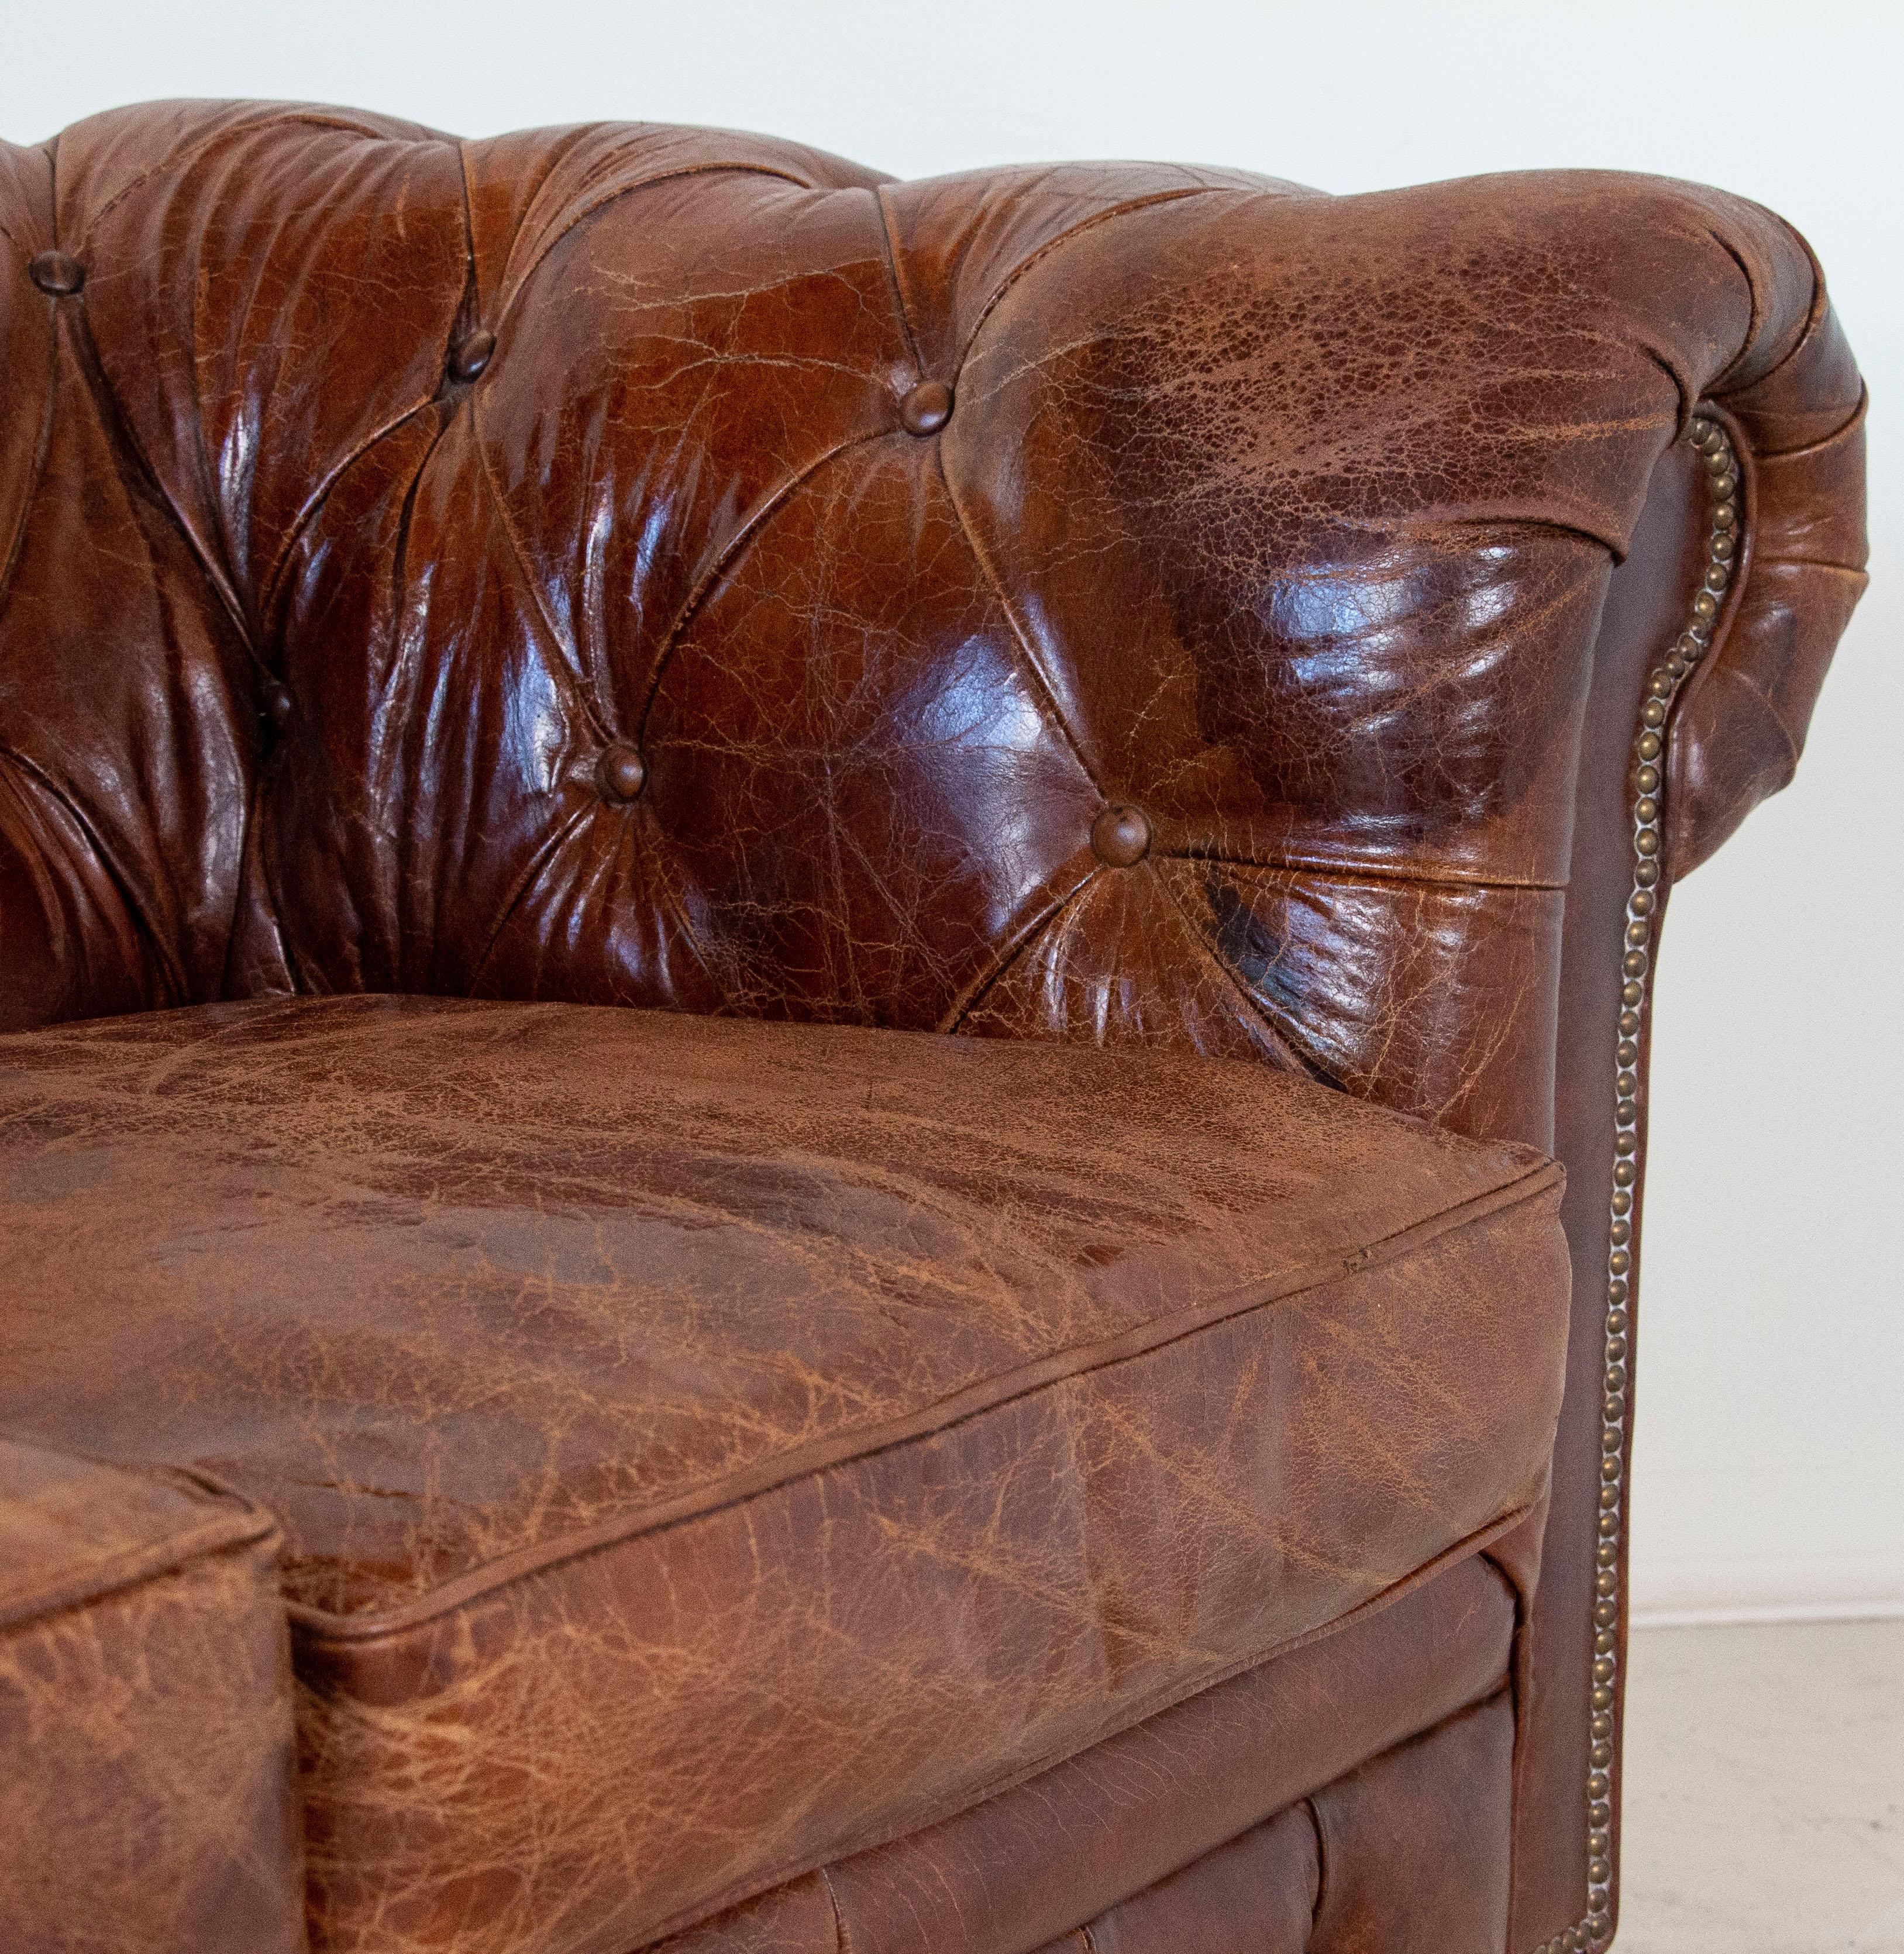 The unique appeal of vintage leather over something new is difficult to describe, but it is the deeper patina that comes slowly over time that creates the depth of character in a wonderful leather sofa such as this one. Added to the classic style of